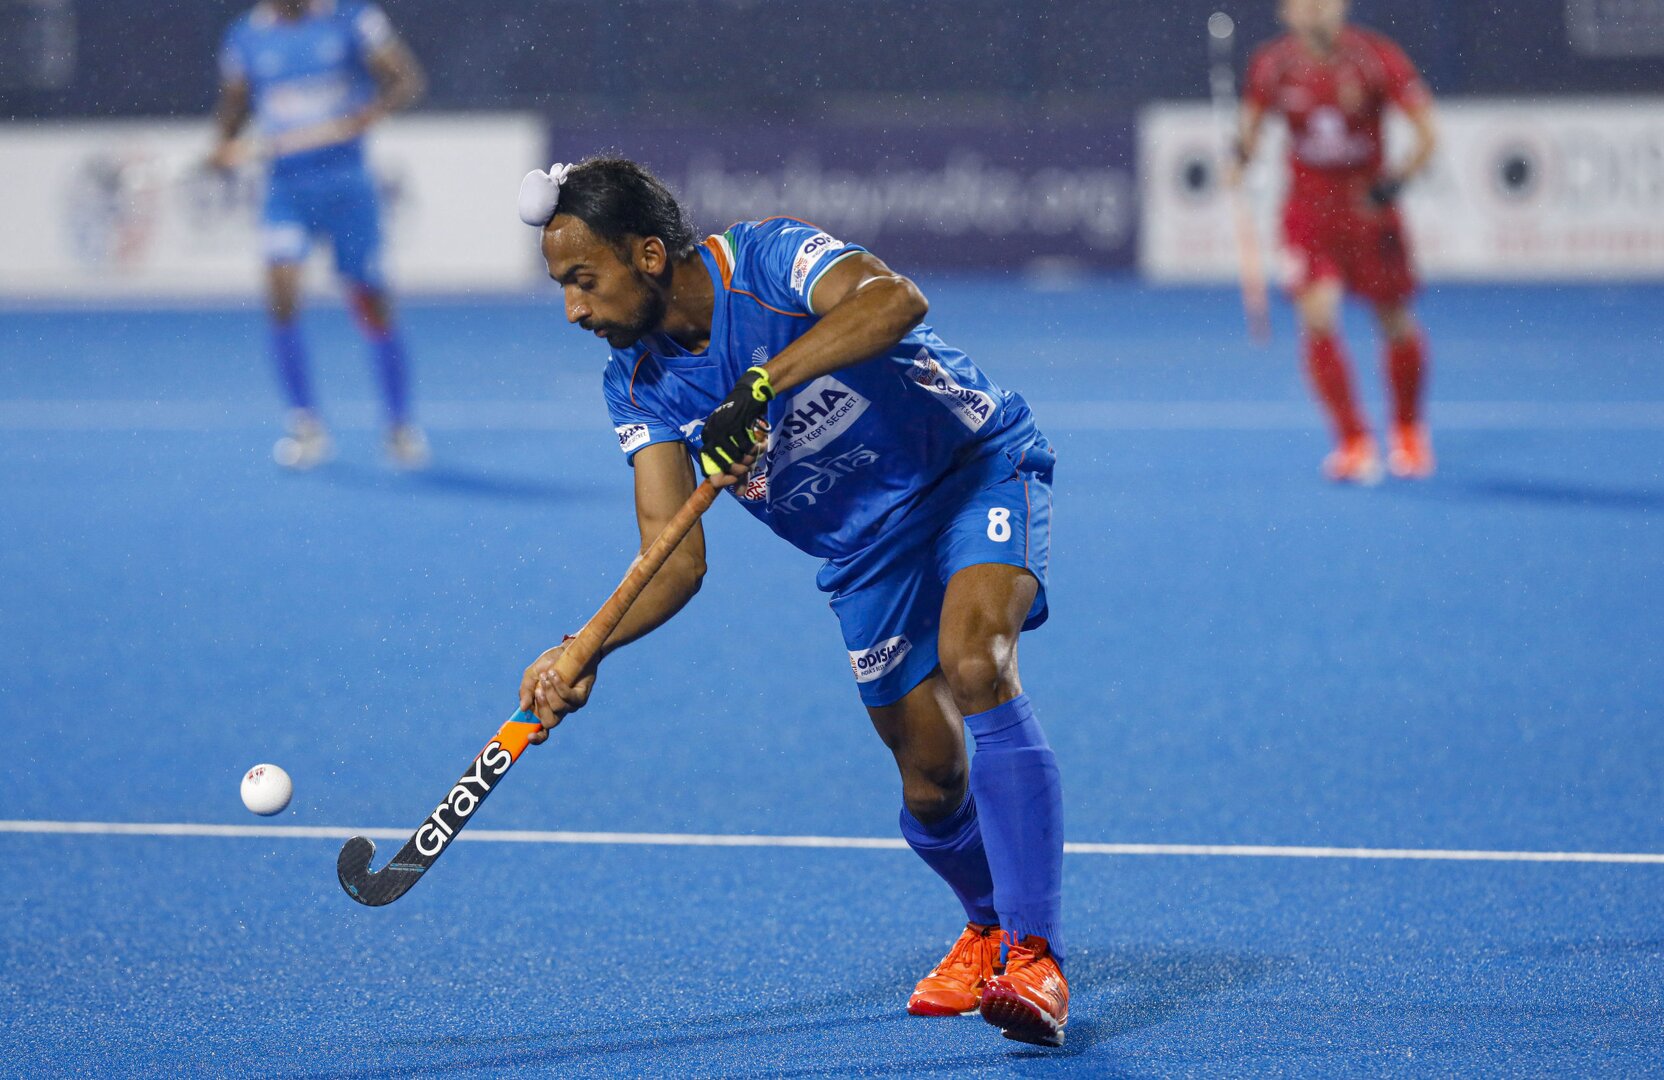 The India men's hockey team won its first Olympic medal against Germany